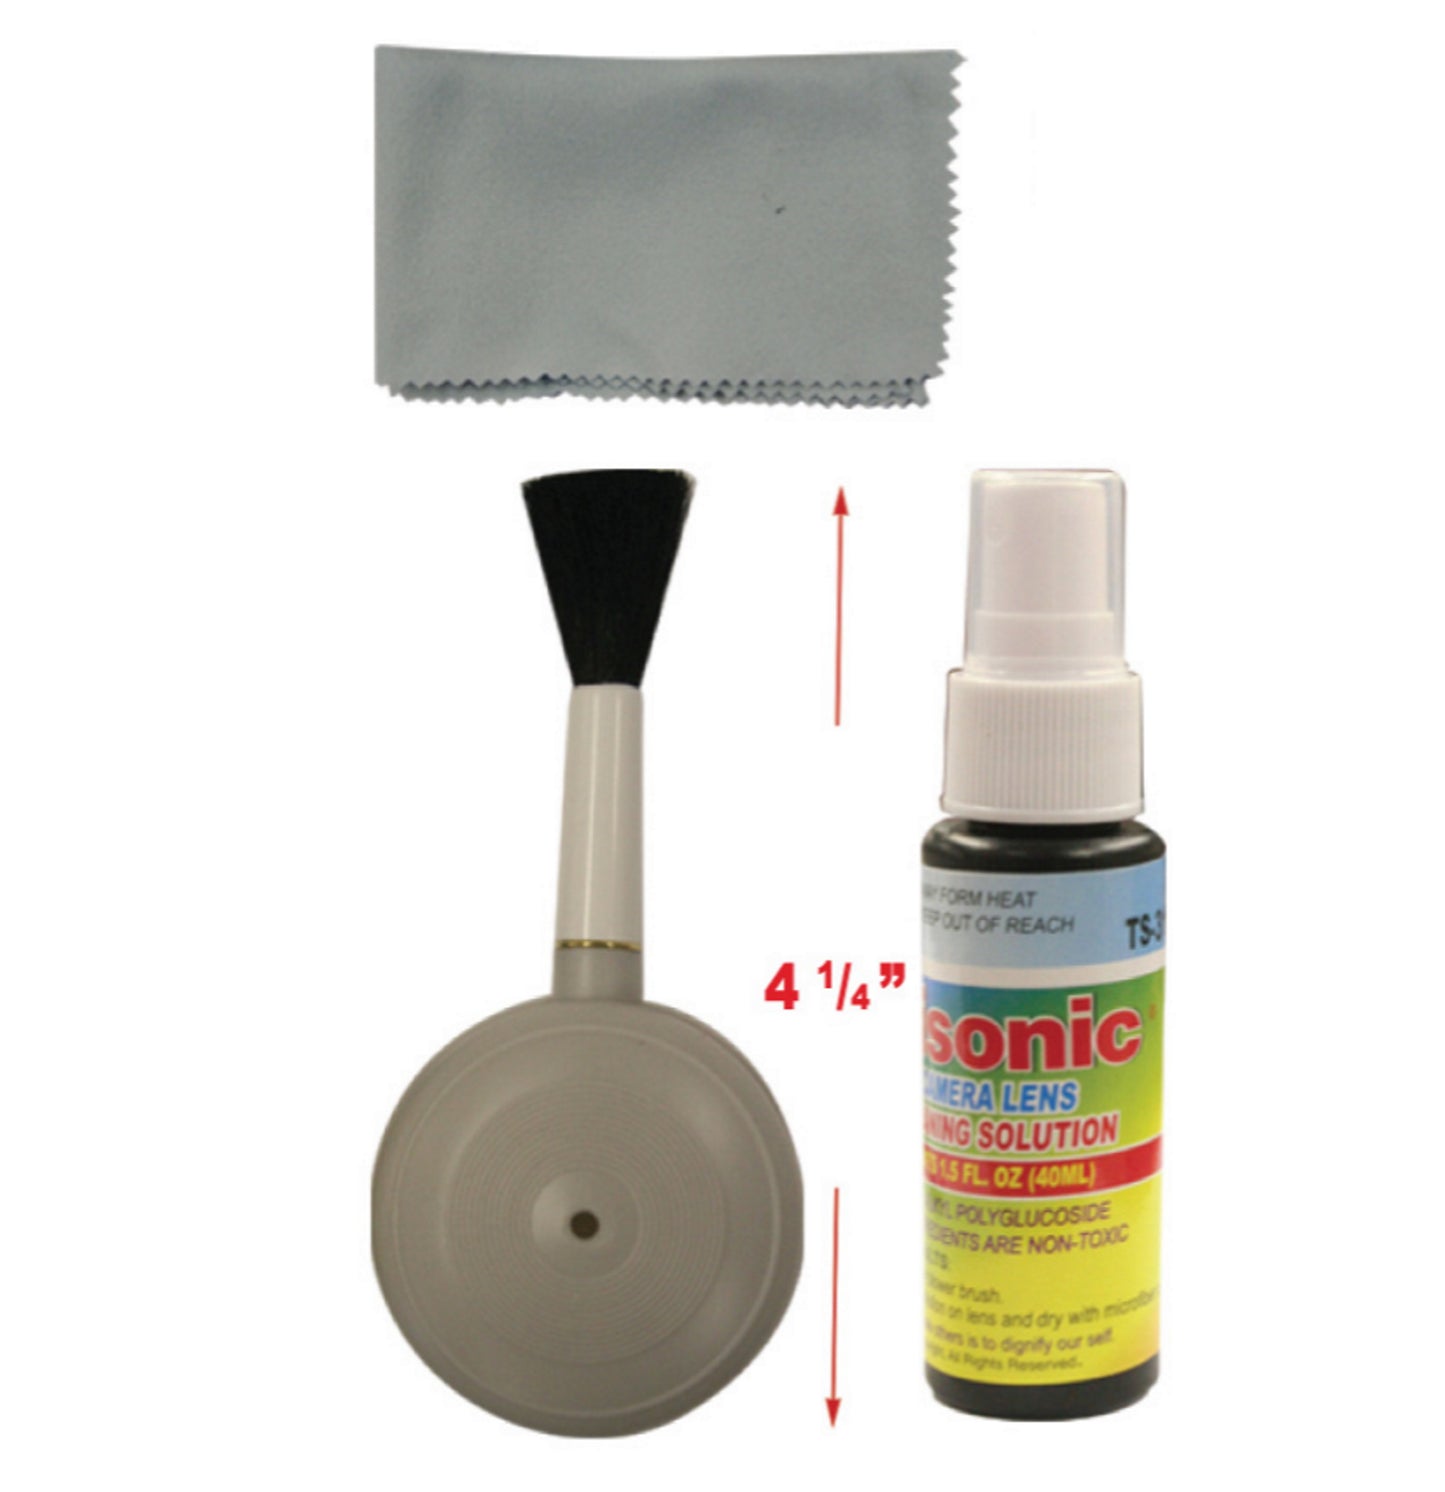 Professional Camera Cleaning Kit for DSLR Cameras - Sensitive Electronics Cleaning Tools and Accessories